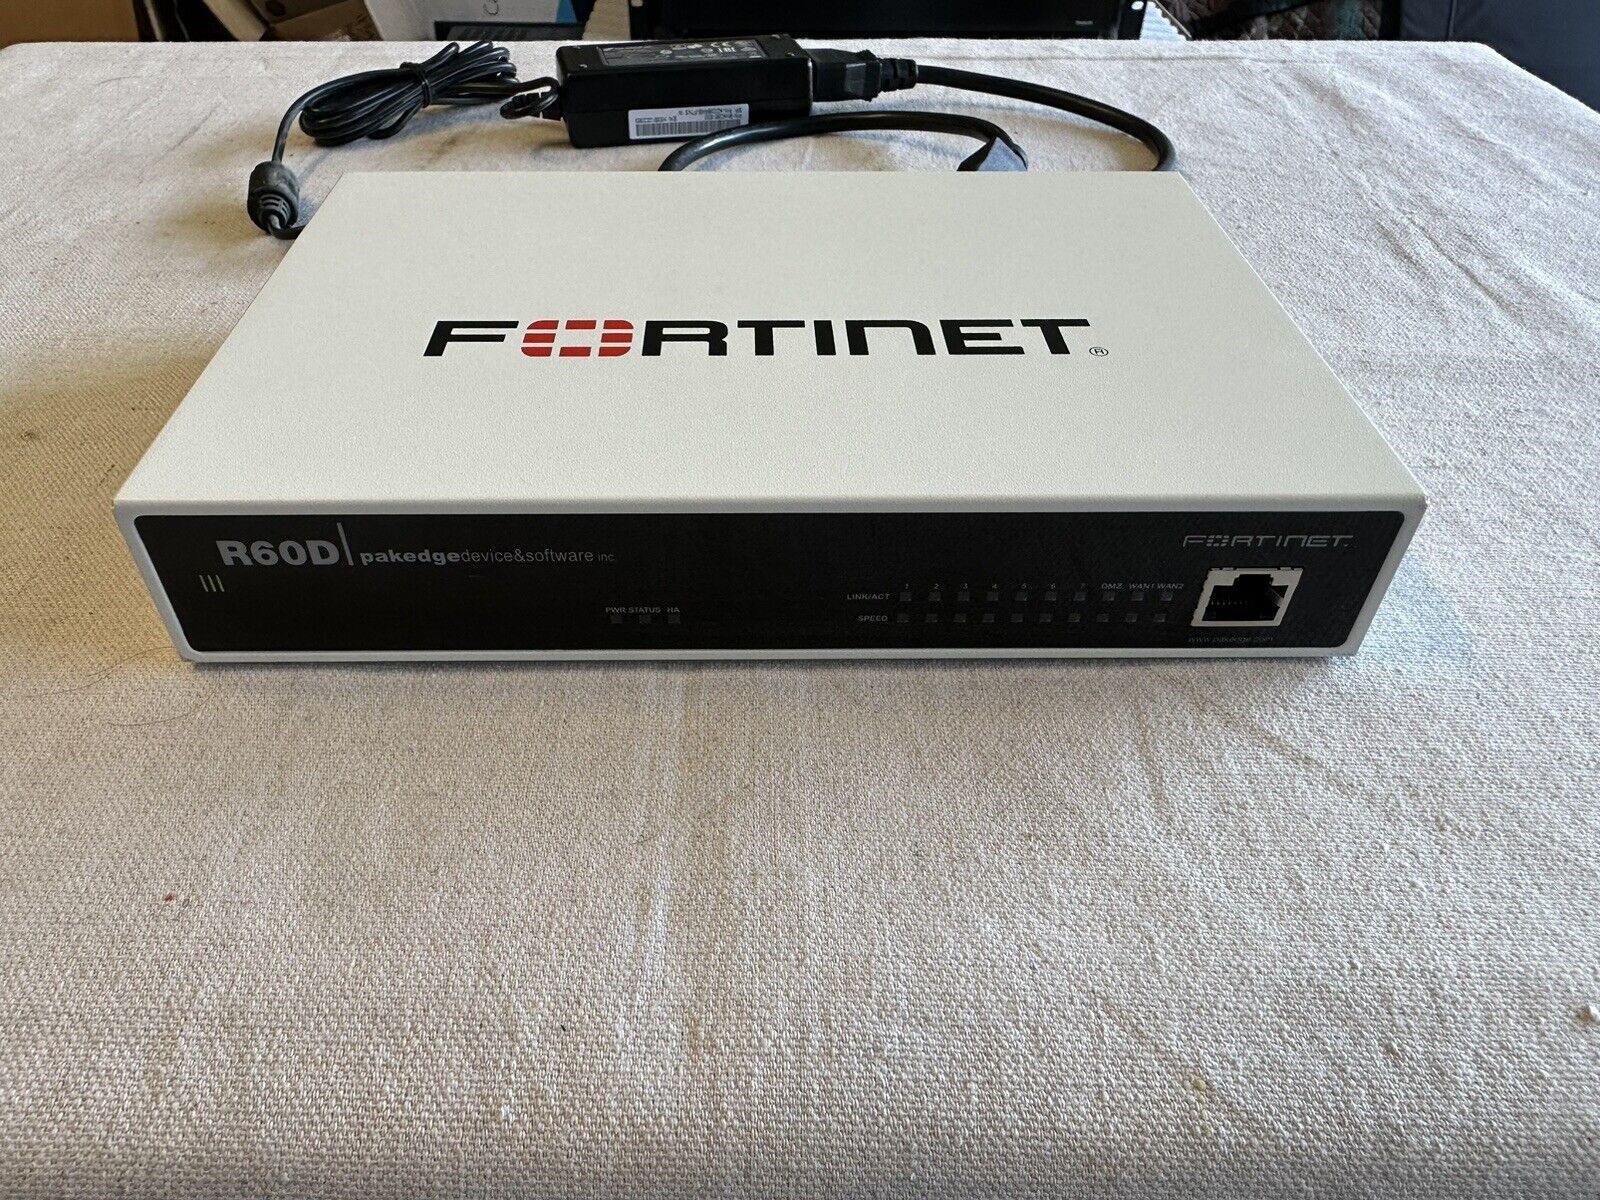 FORTINET PAKEDGE DEVICE R60D FORTIGATE FG-60D NETWORK FIREWALL